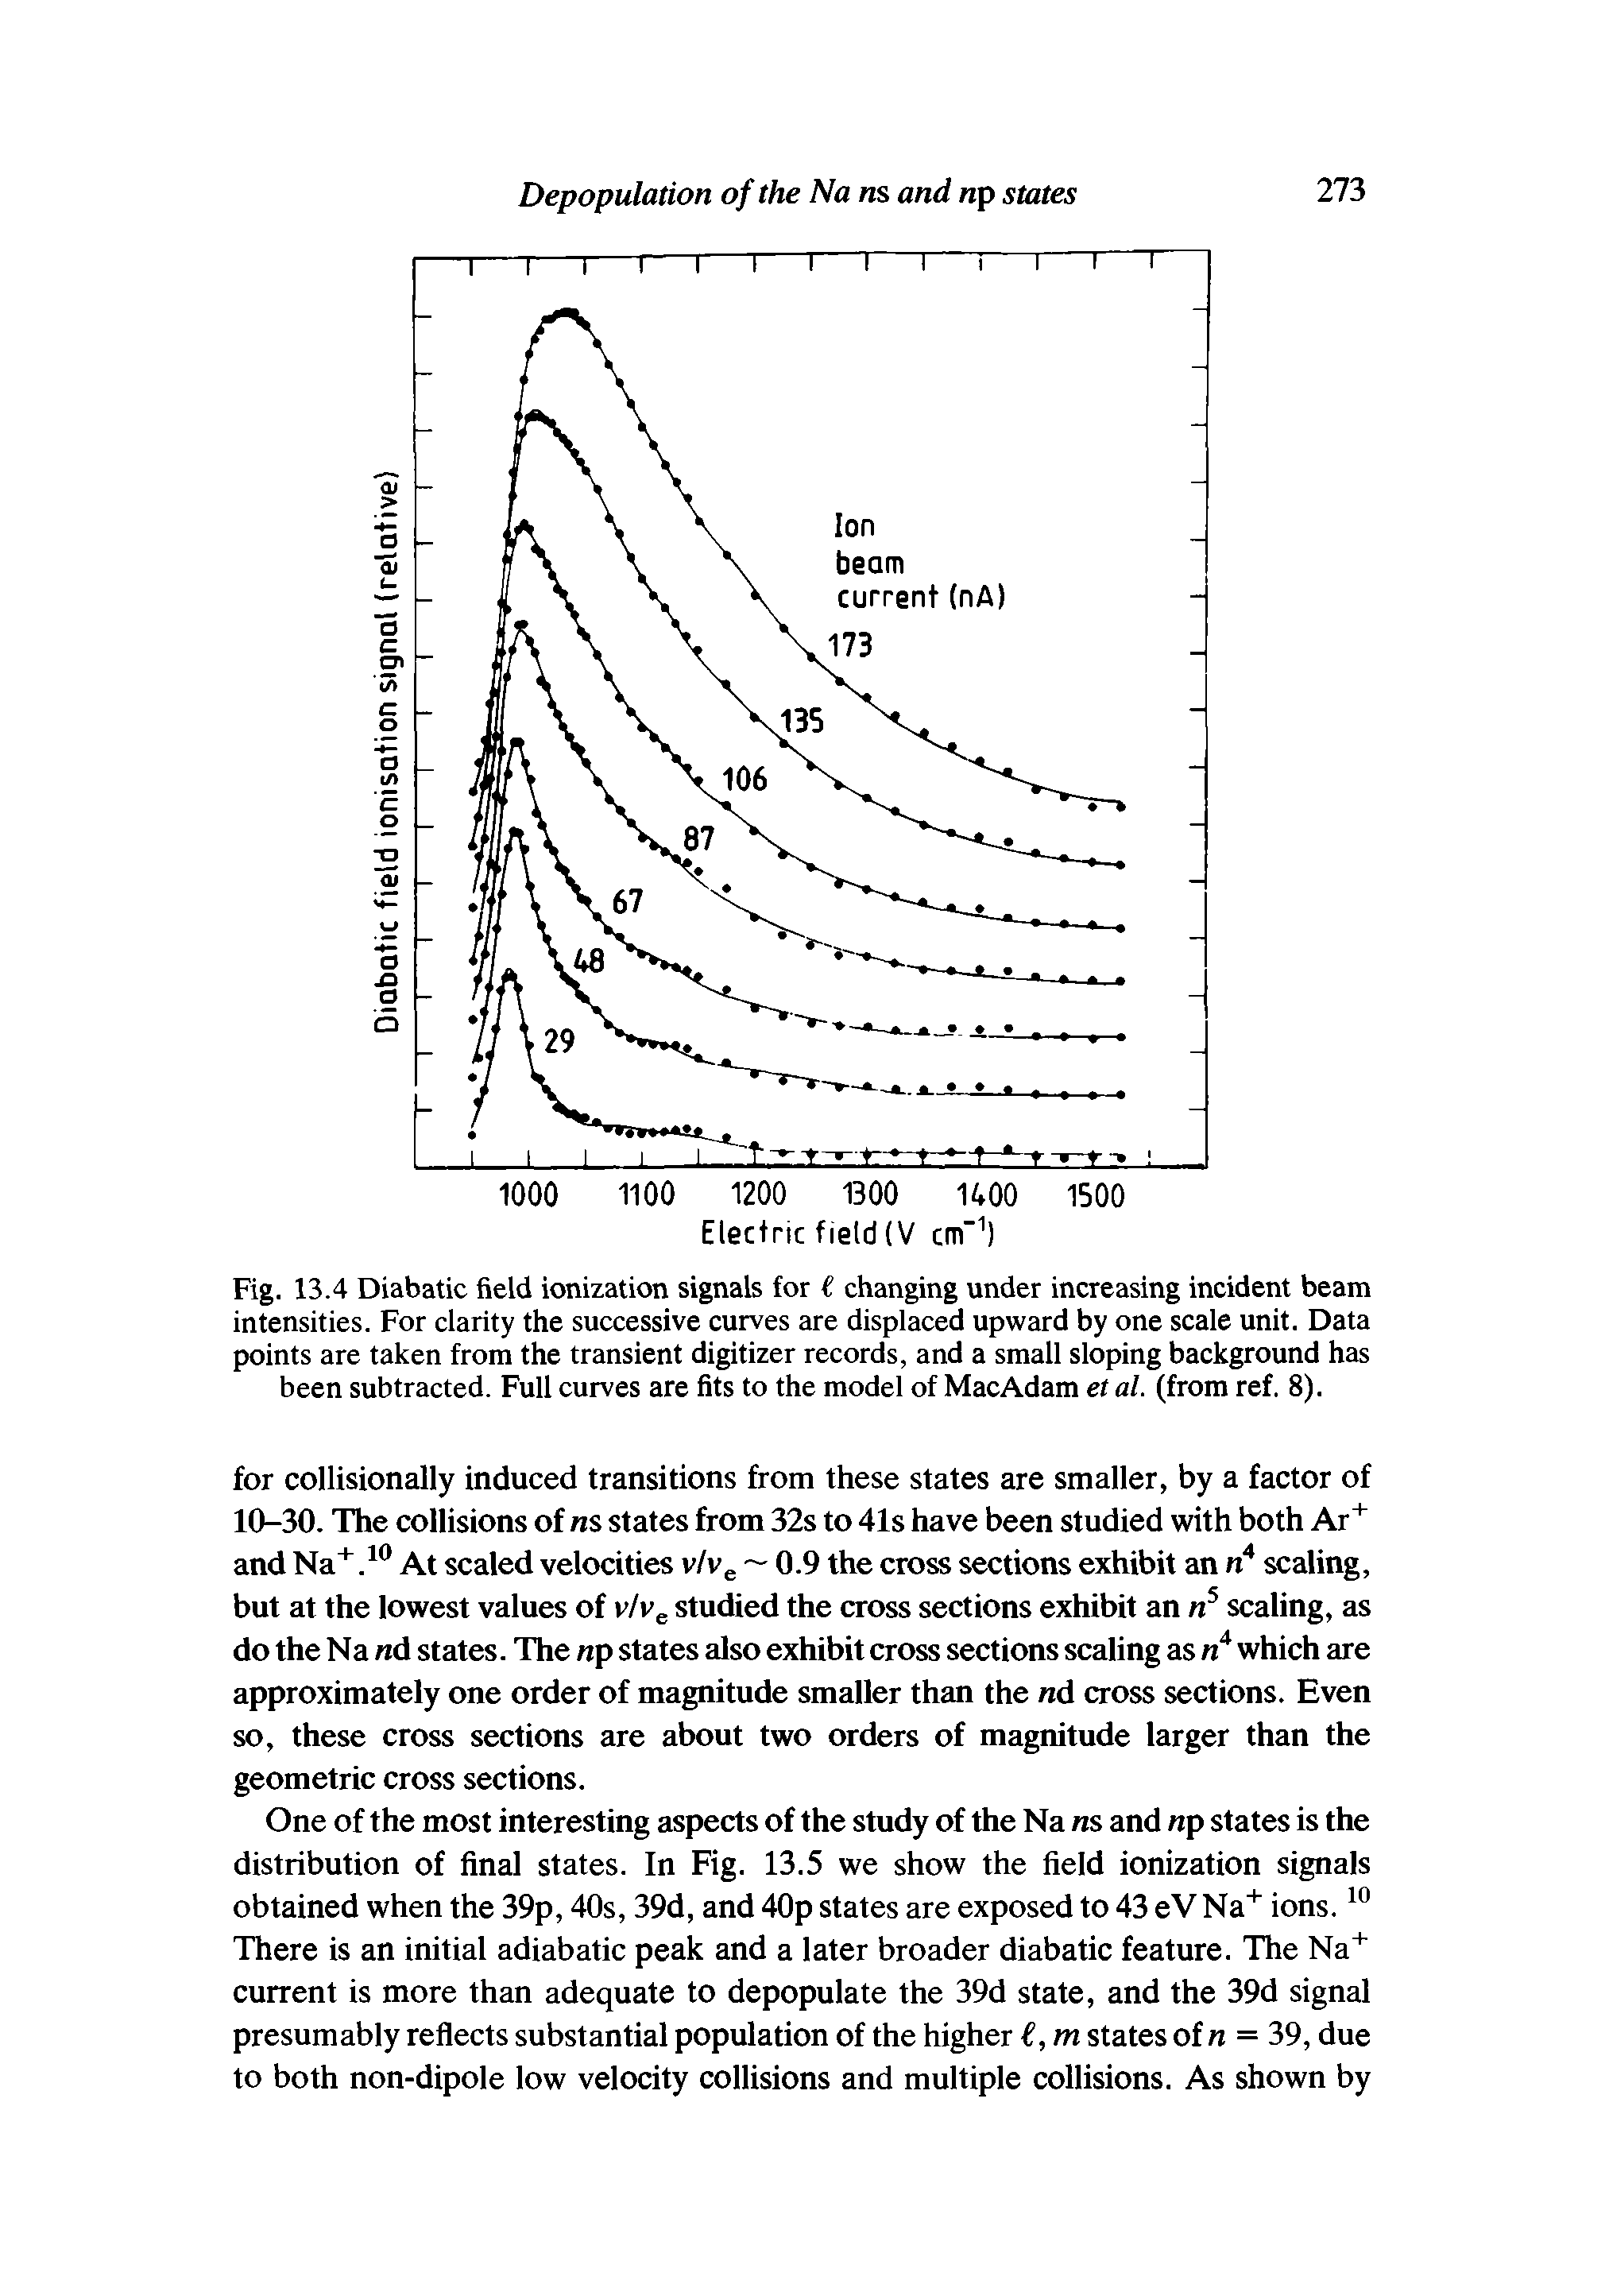 Fig. 13.4 Diabatic field ionization signals for i changing under increasing incident beam intensities. For clarity the successive curves are displaced upward by one scale unit. Data points are taken from the transient digitizer records, and a small sloping background has been subtracted. Full curves are fits to the model of MacAdam et al. (from ref. 8).